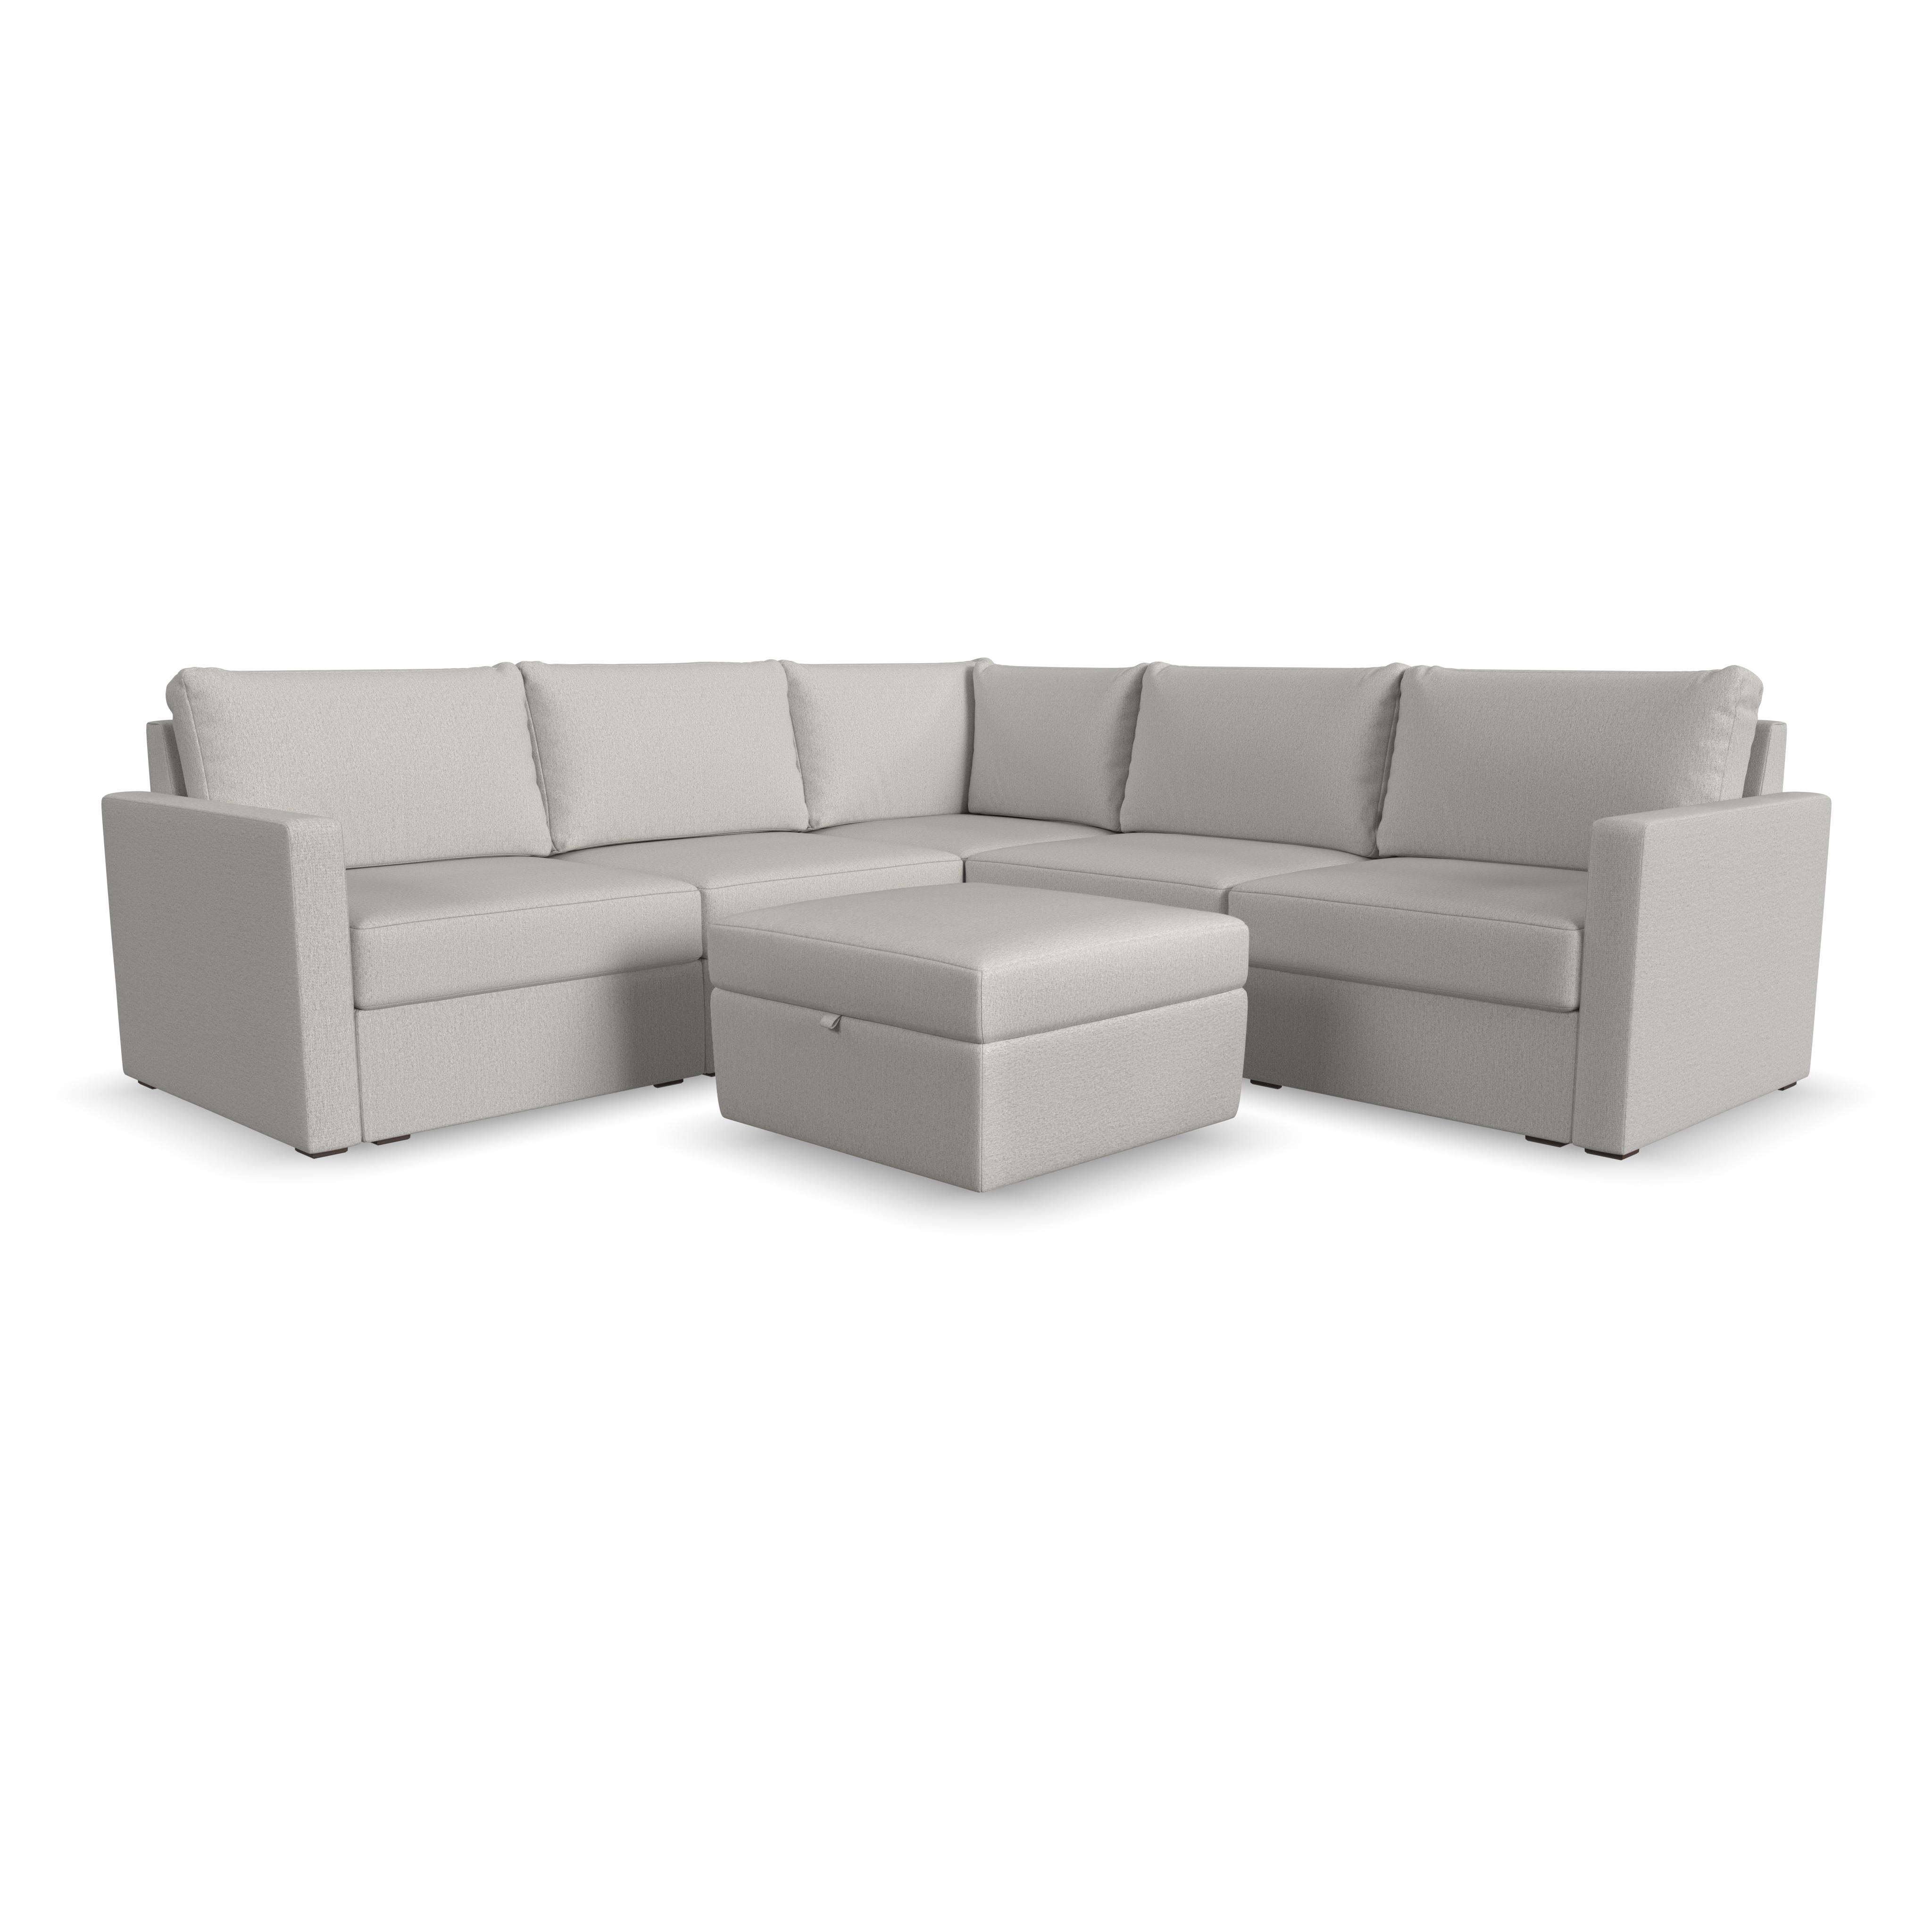 Flexsteel Flex 5-Seat Sectional with Standard Arm and Storage Ottoman